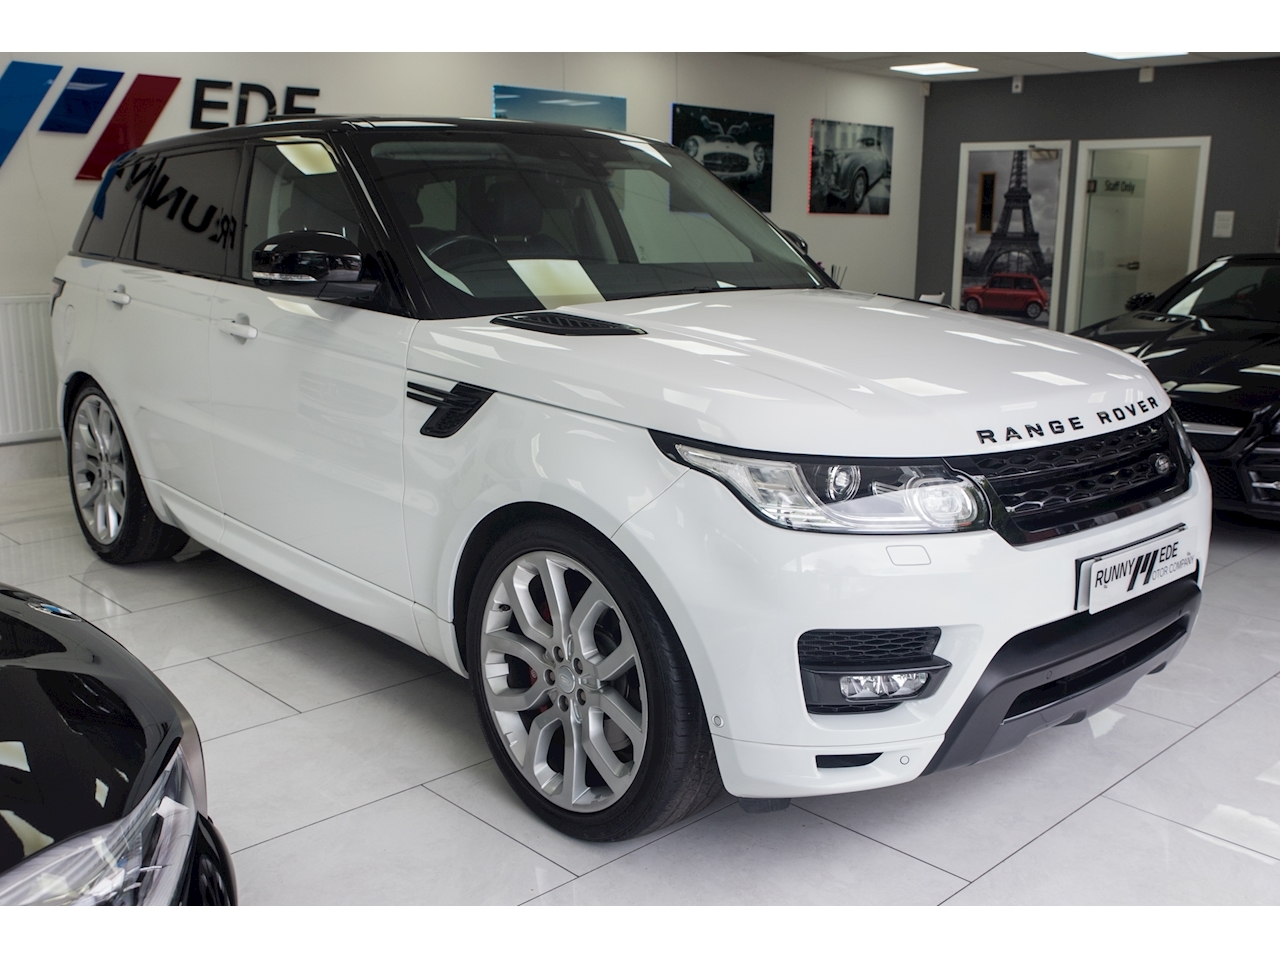 3.0 SD V6 Autobiography Dynamic SUV 5dr Diesel Auto 4WD (s/s) (185 g/km, 302 bhp)